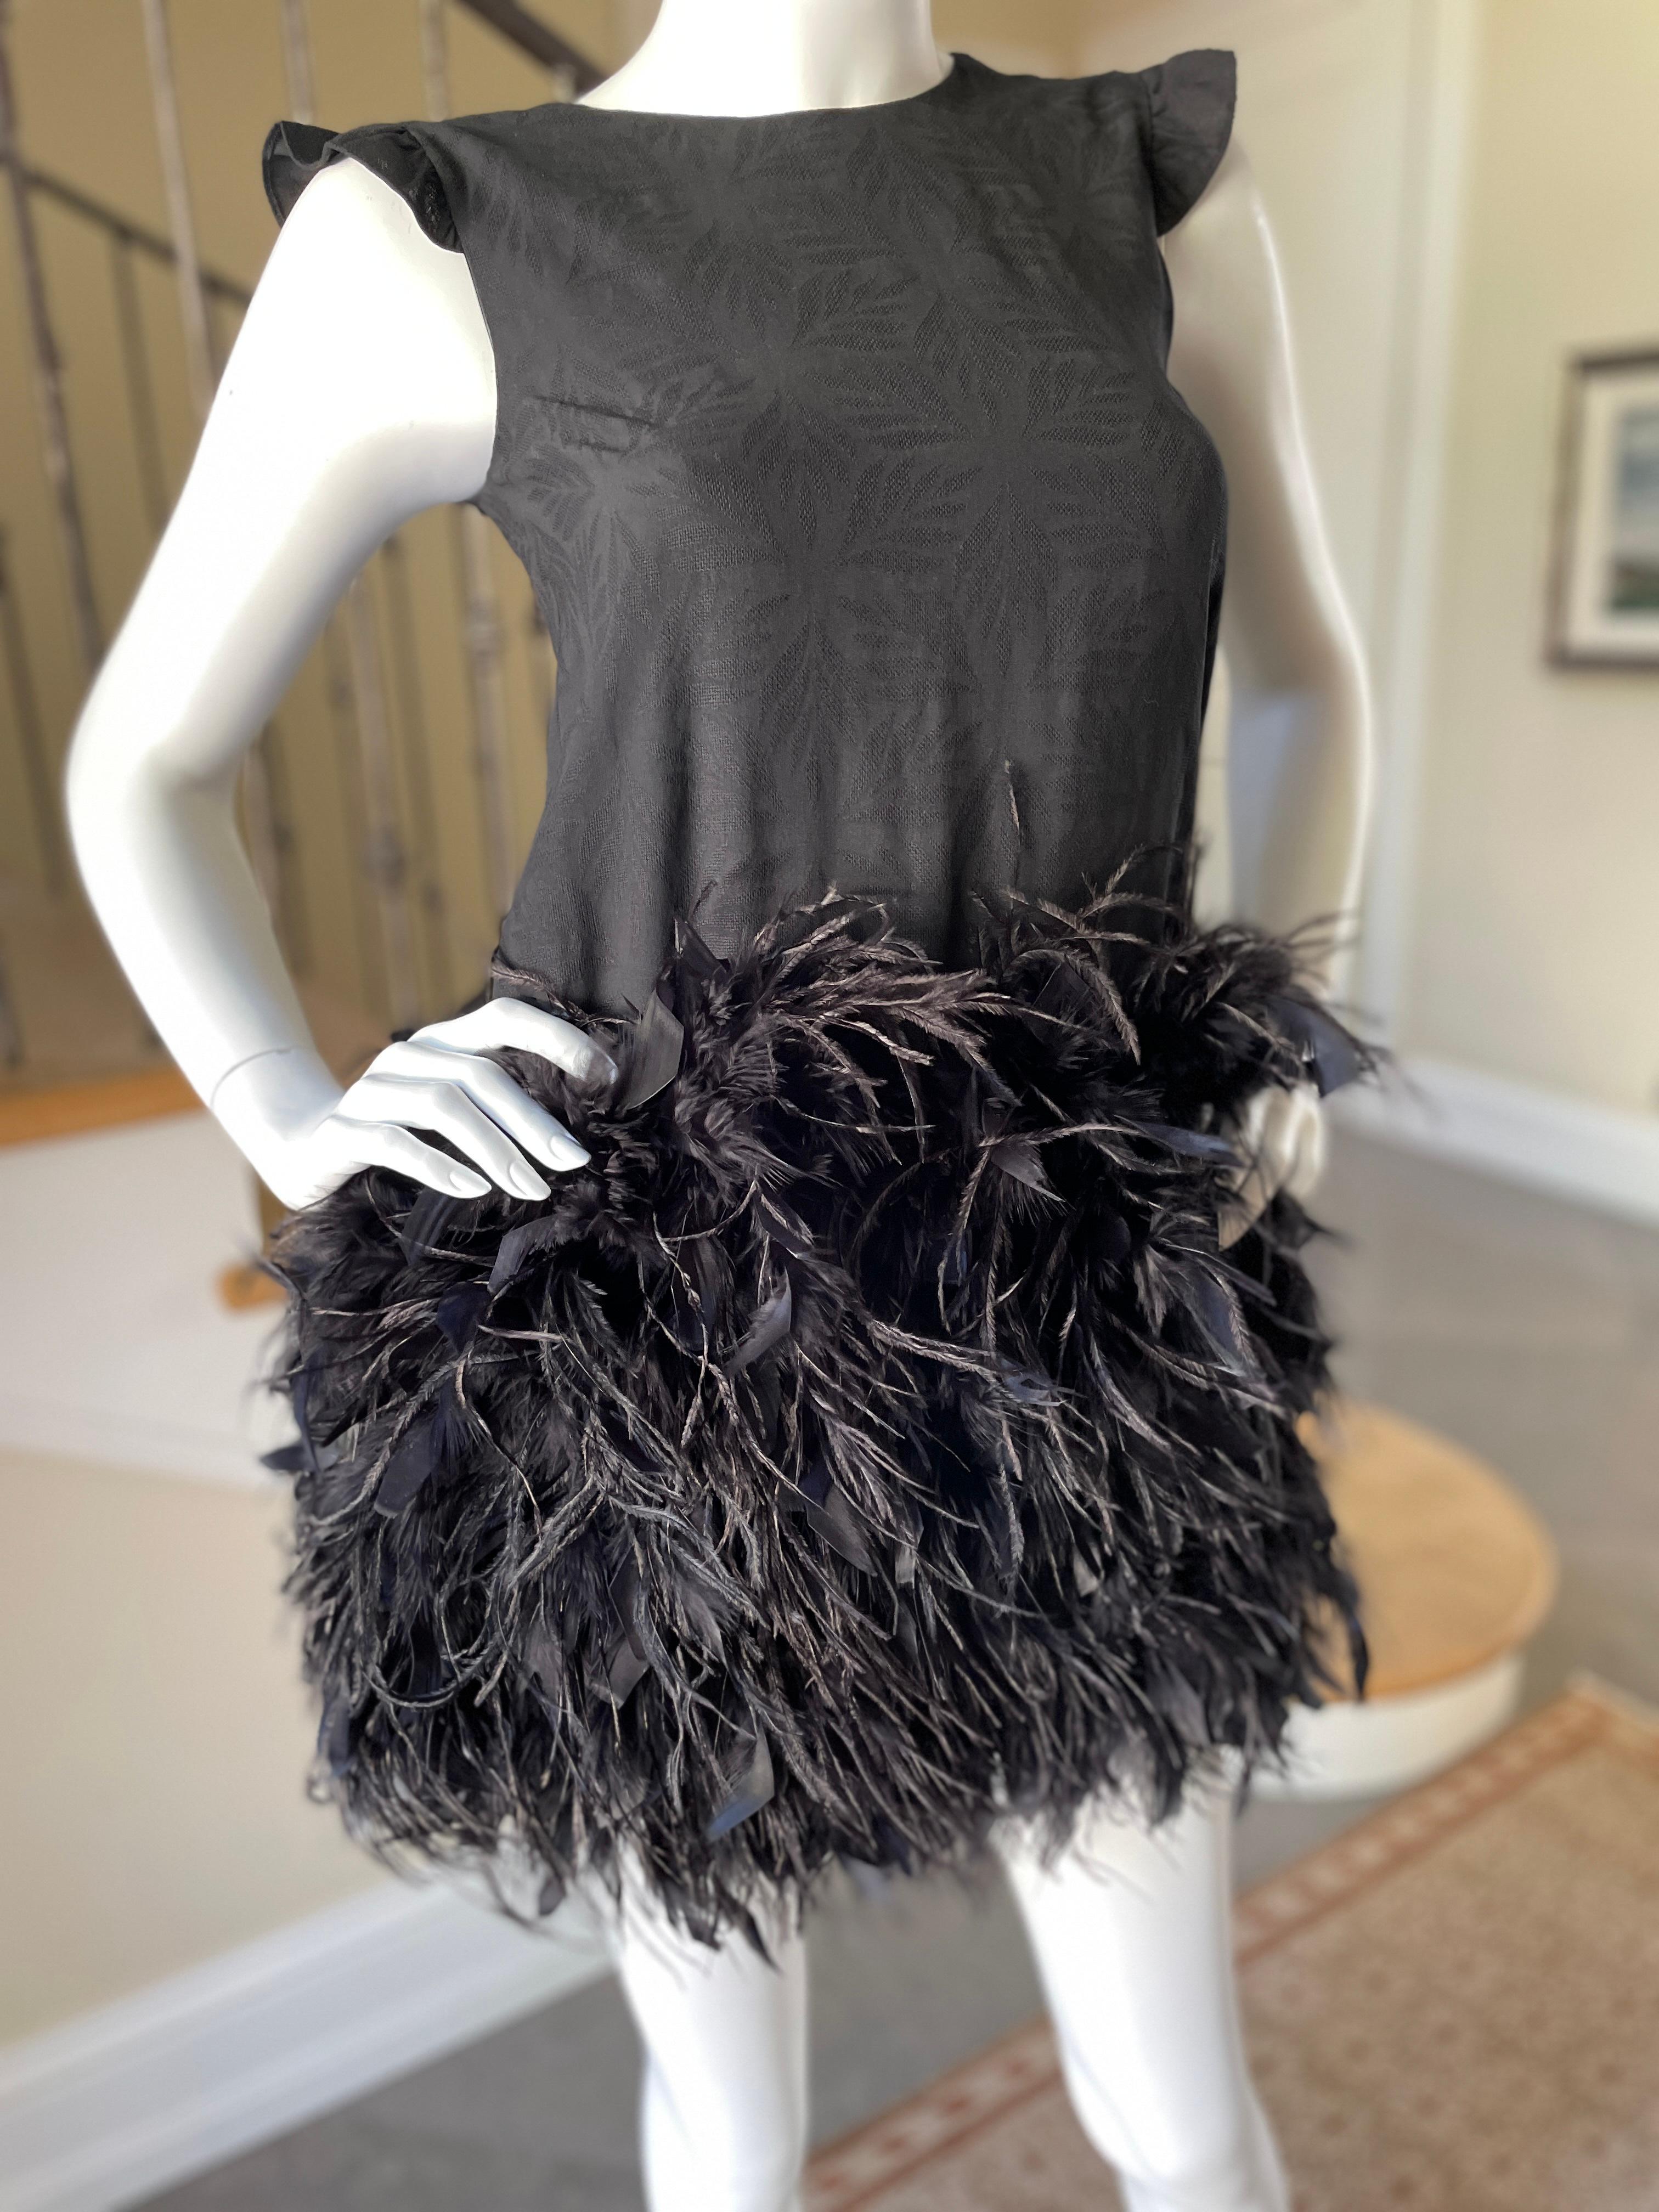 Christian Dior Vintage Little Black Dress with Festive Feather Skirt In Excellent Condition For Sale In Cloverdale, CA